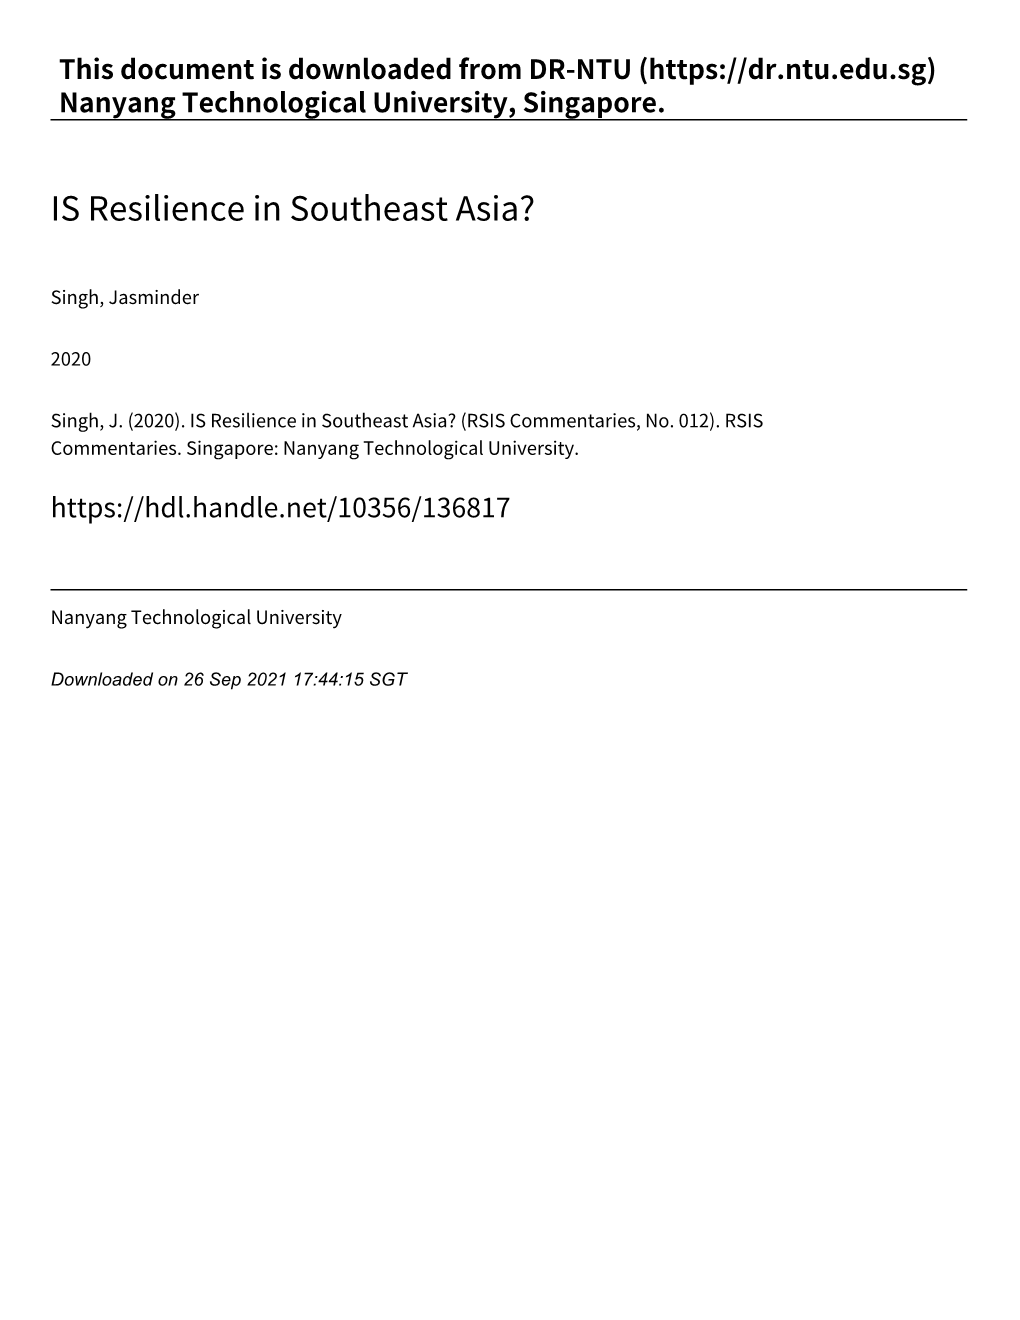 IS Resilience in Southeast Asia?